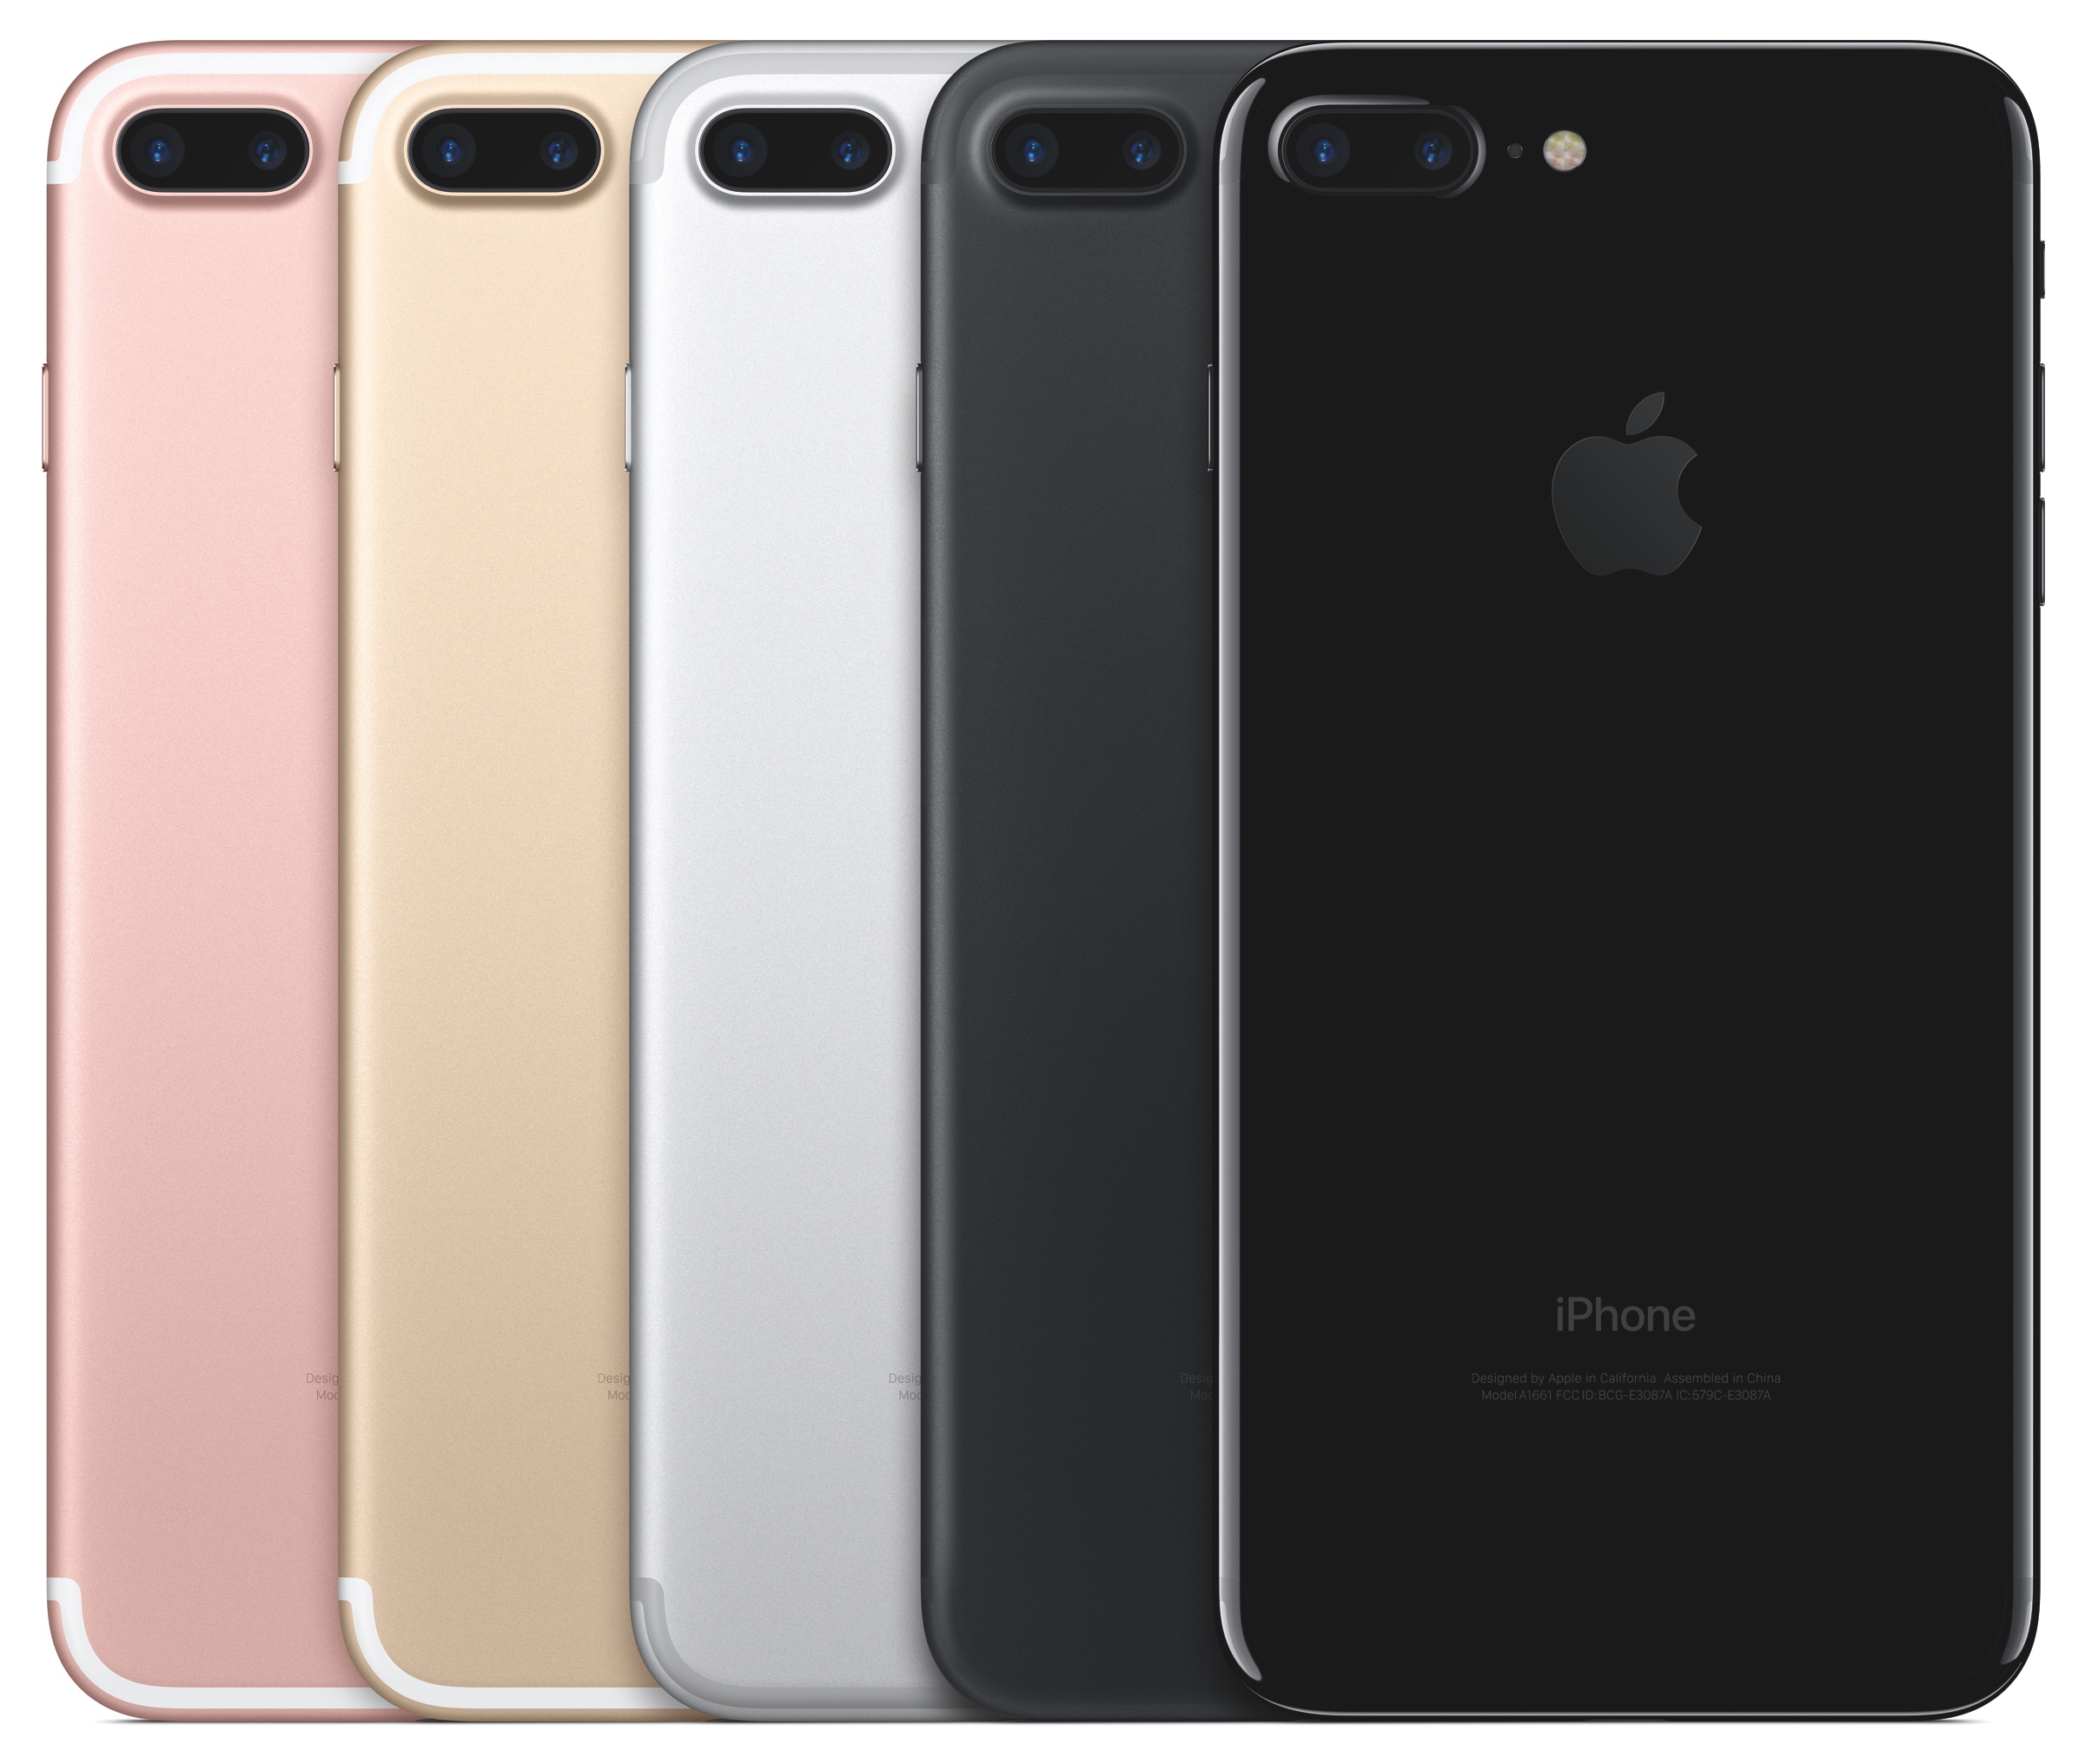 The iPhone 7 Plus lineup.